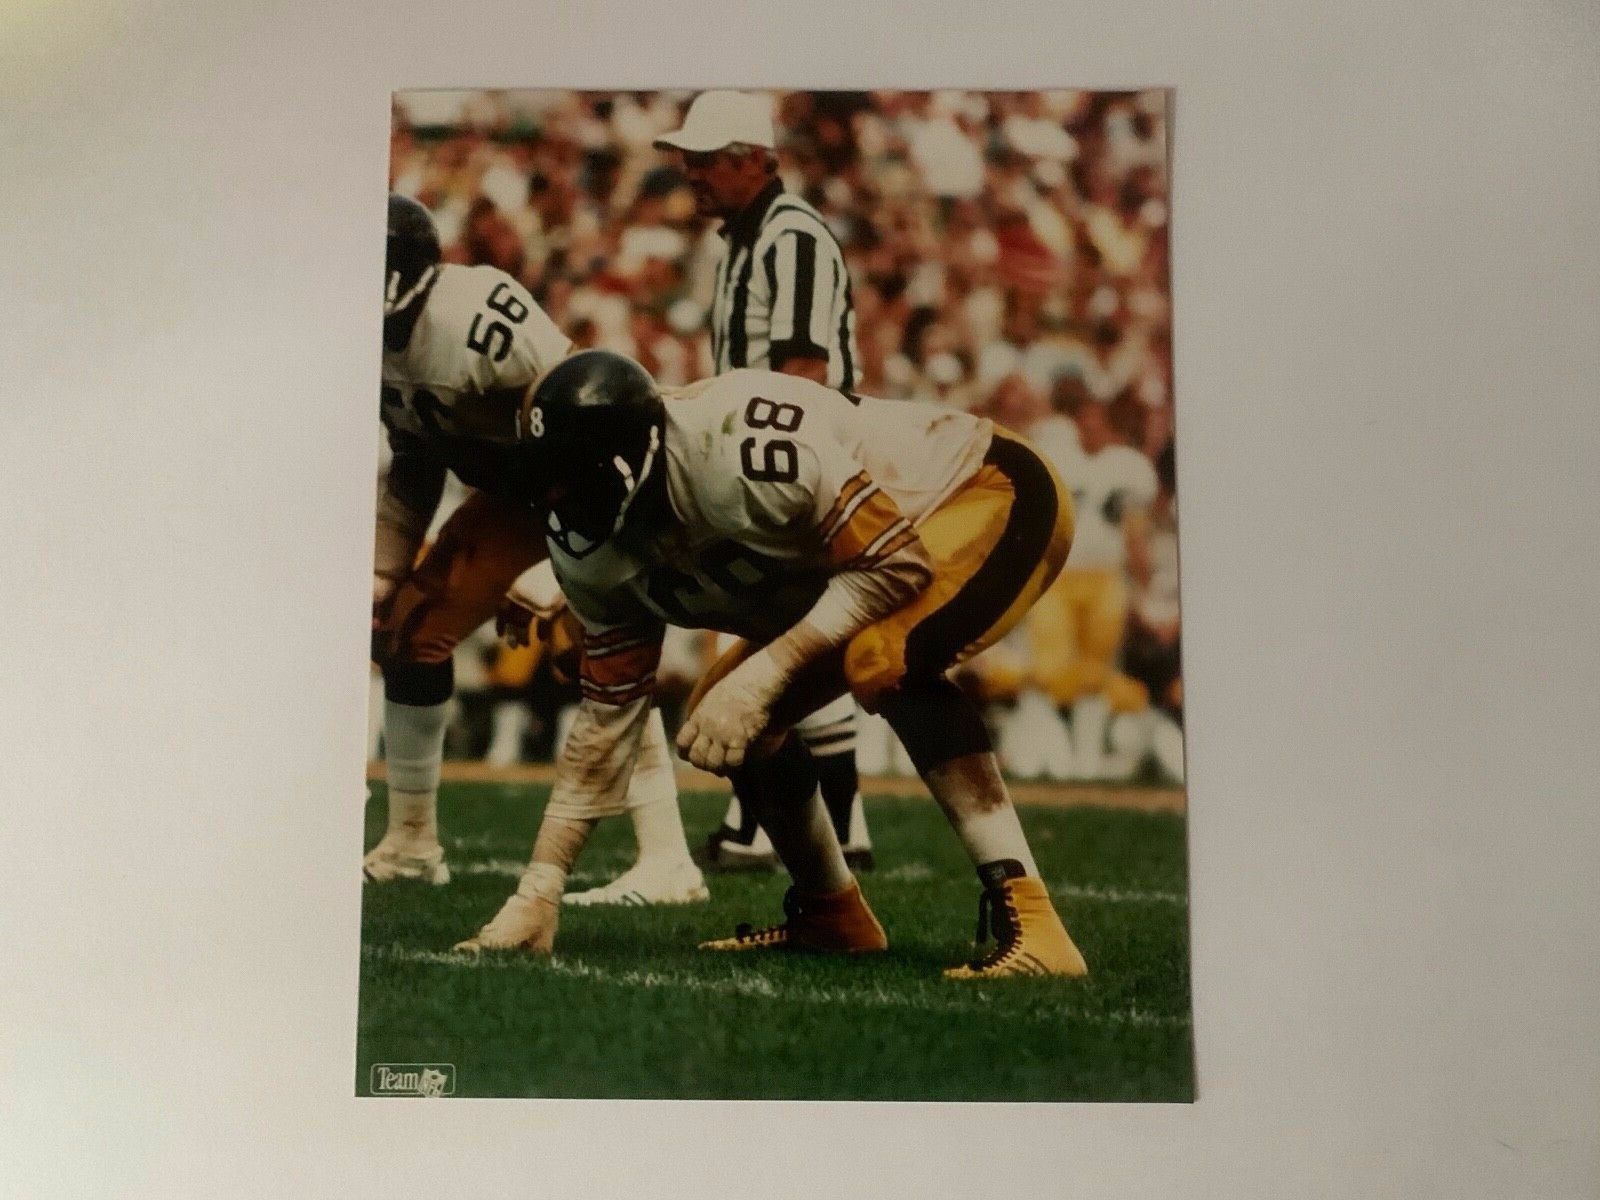 LC Greenwood Pittsburgh Steelers NFL Sports Football 8x10 Color Photo AGFA Paper